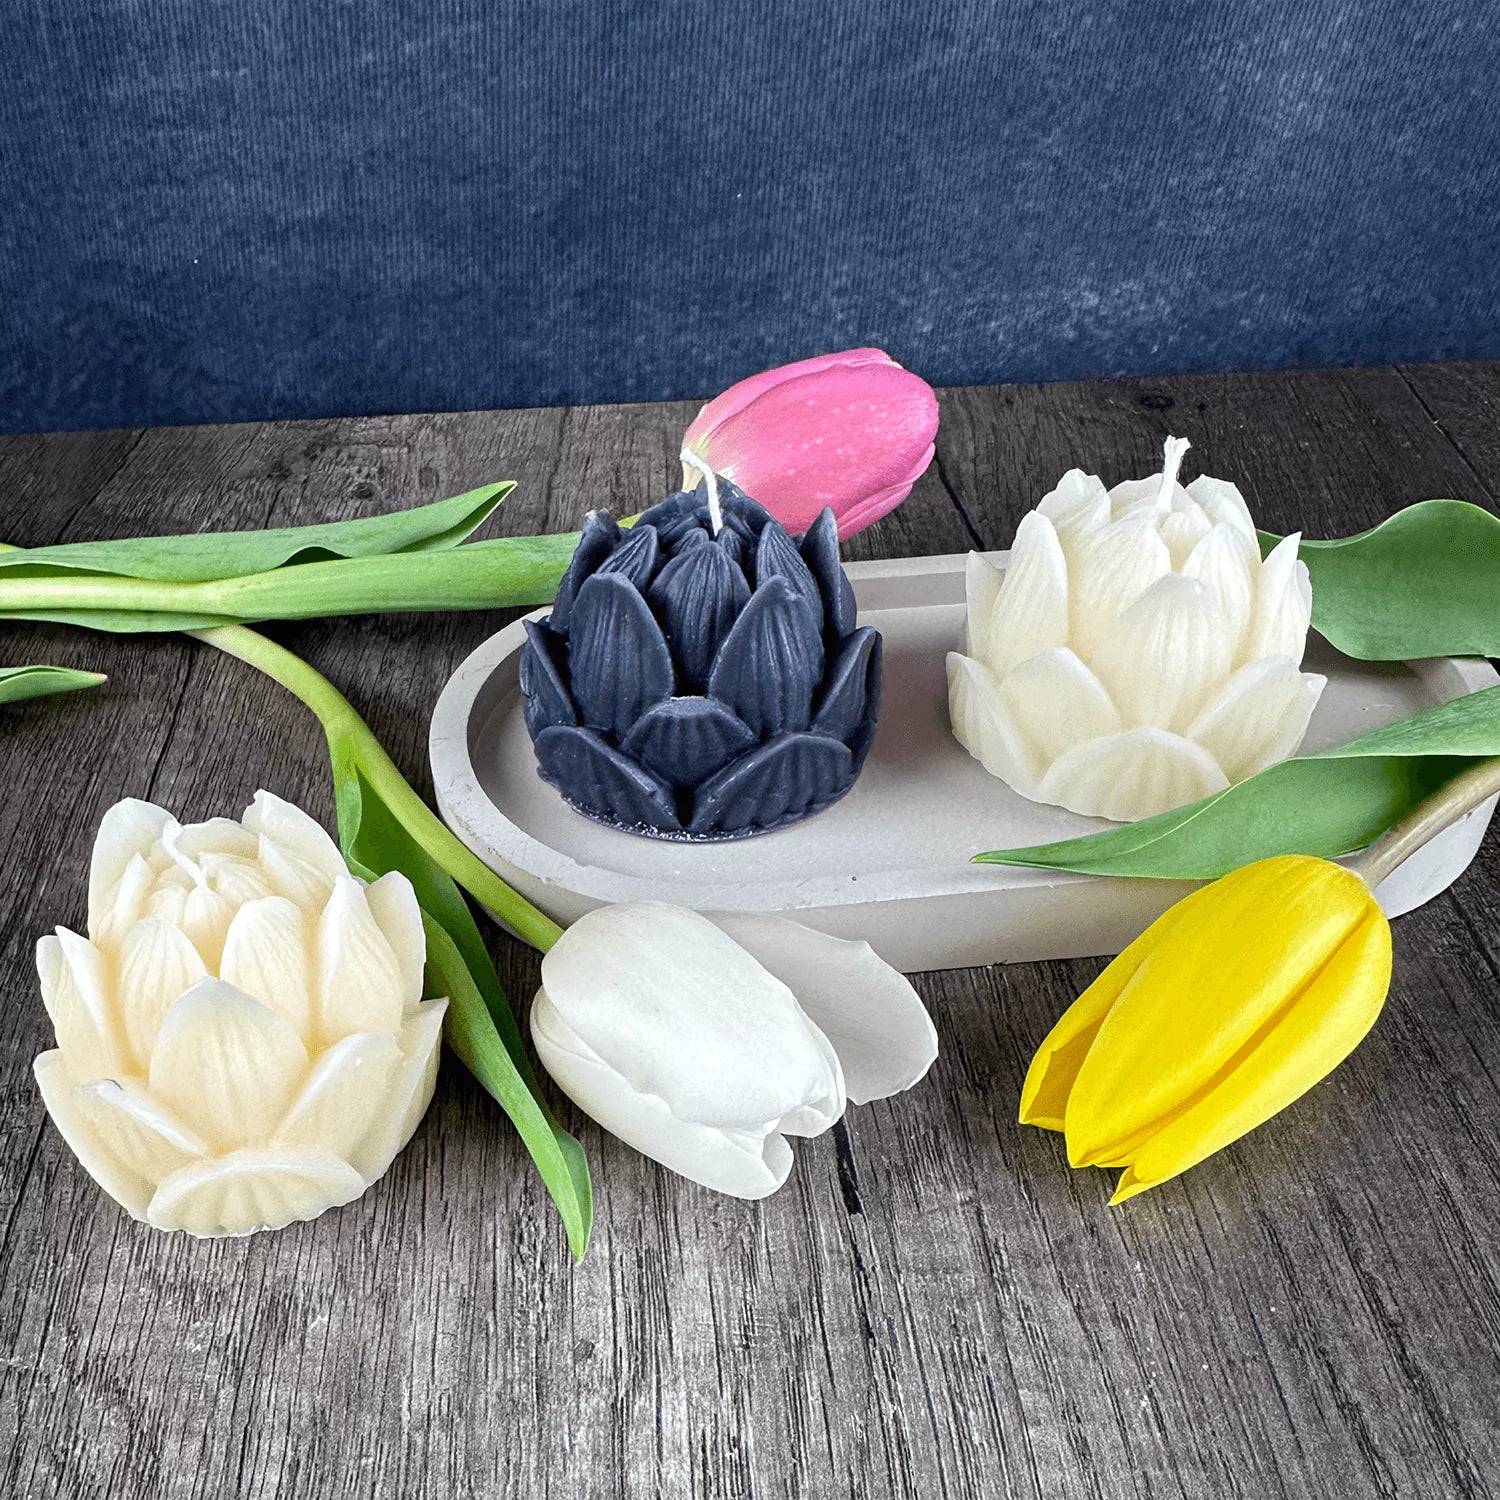 Lotus Soy Candle